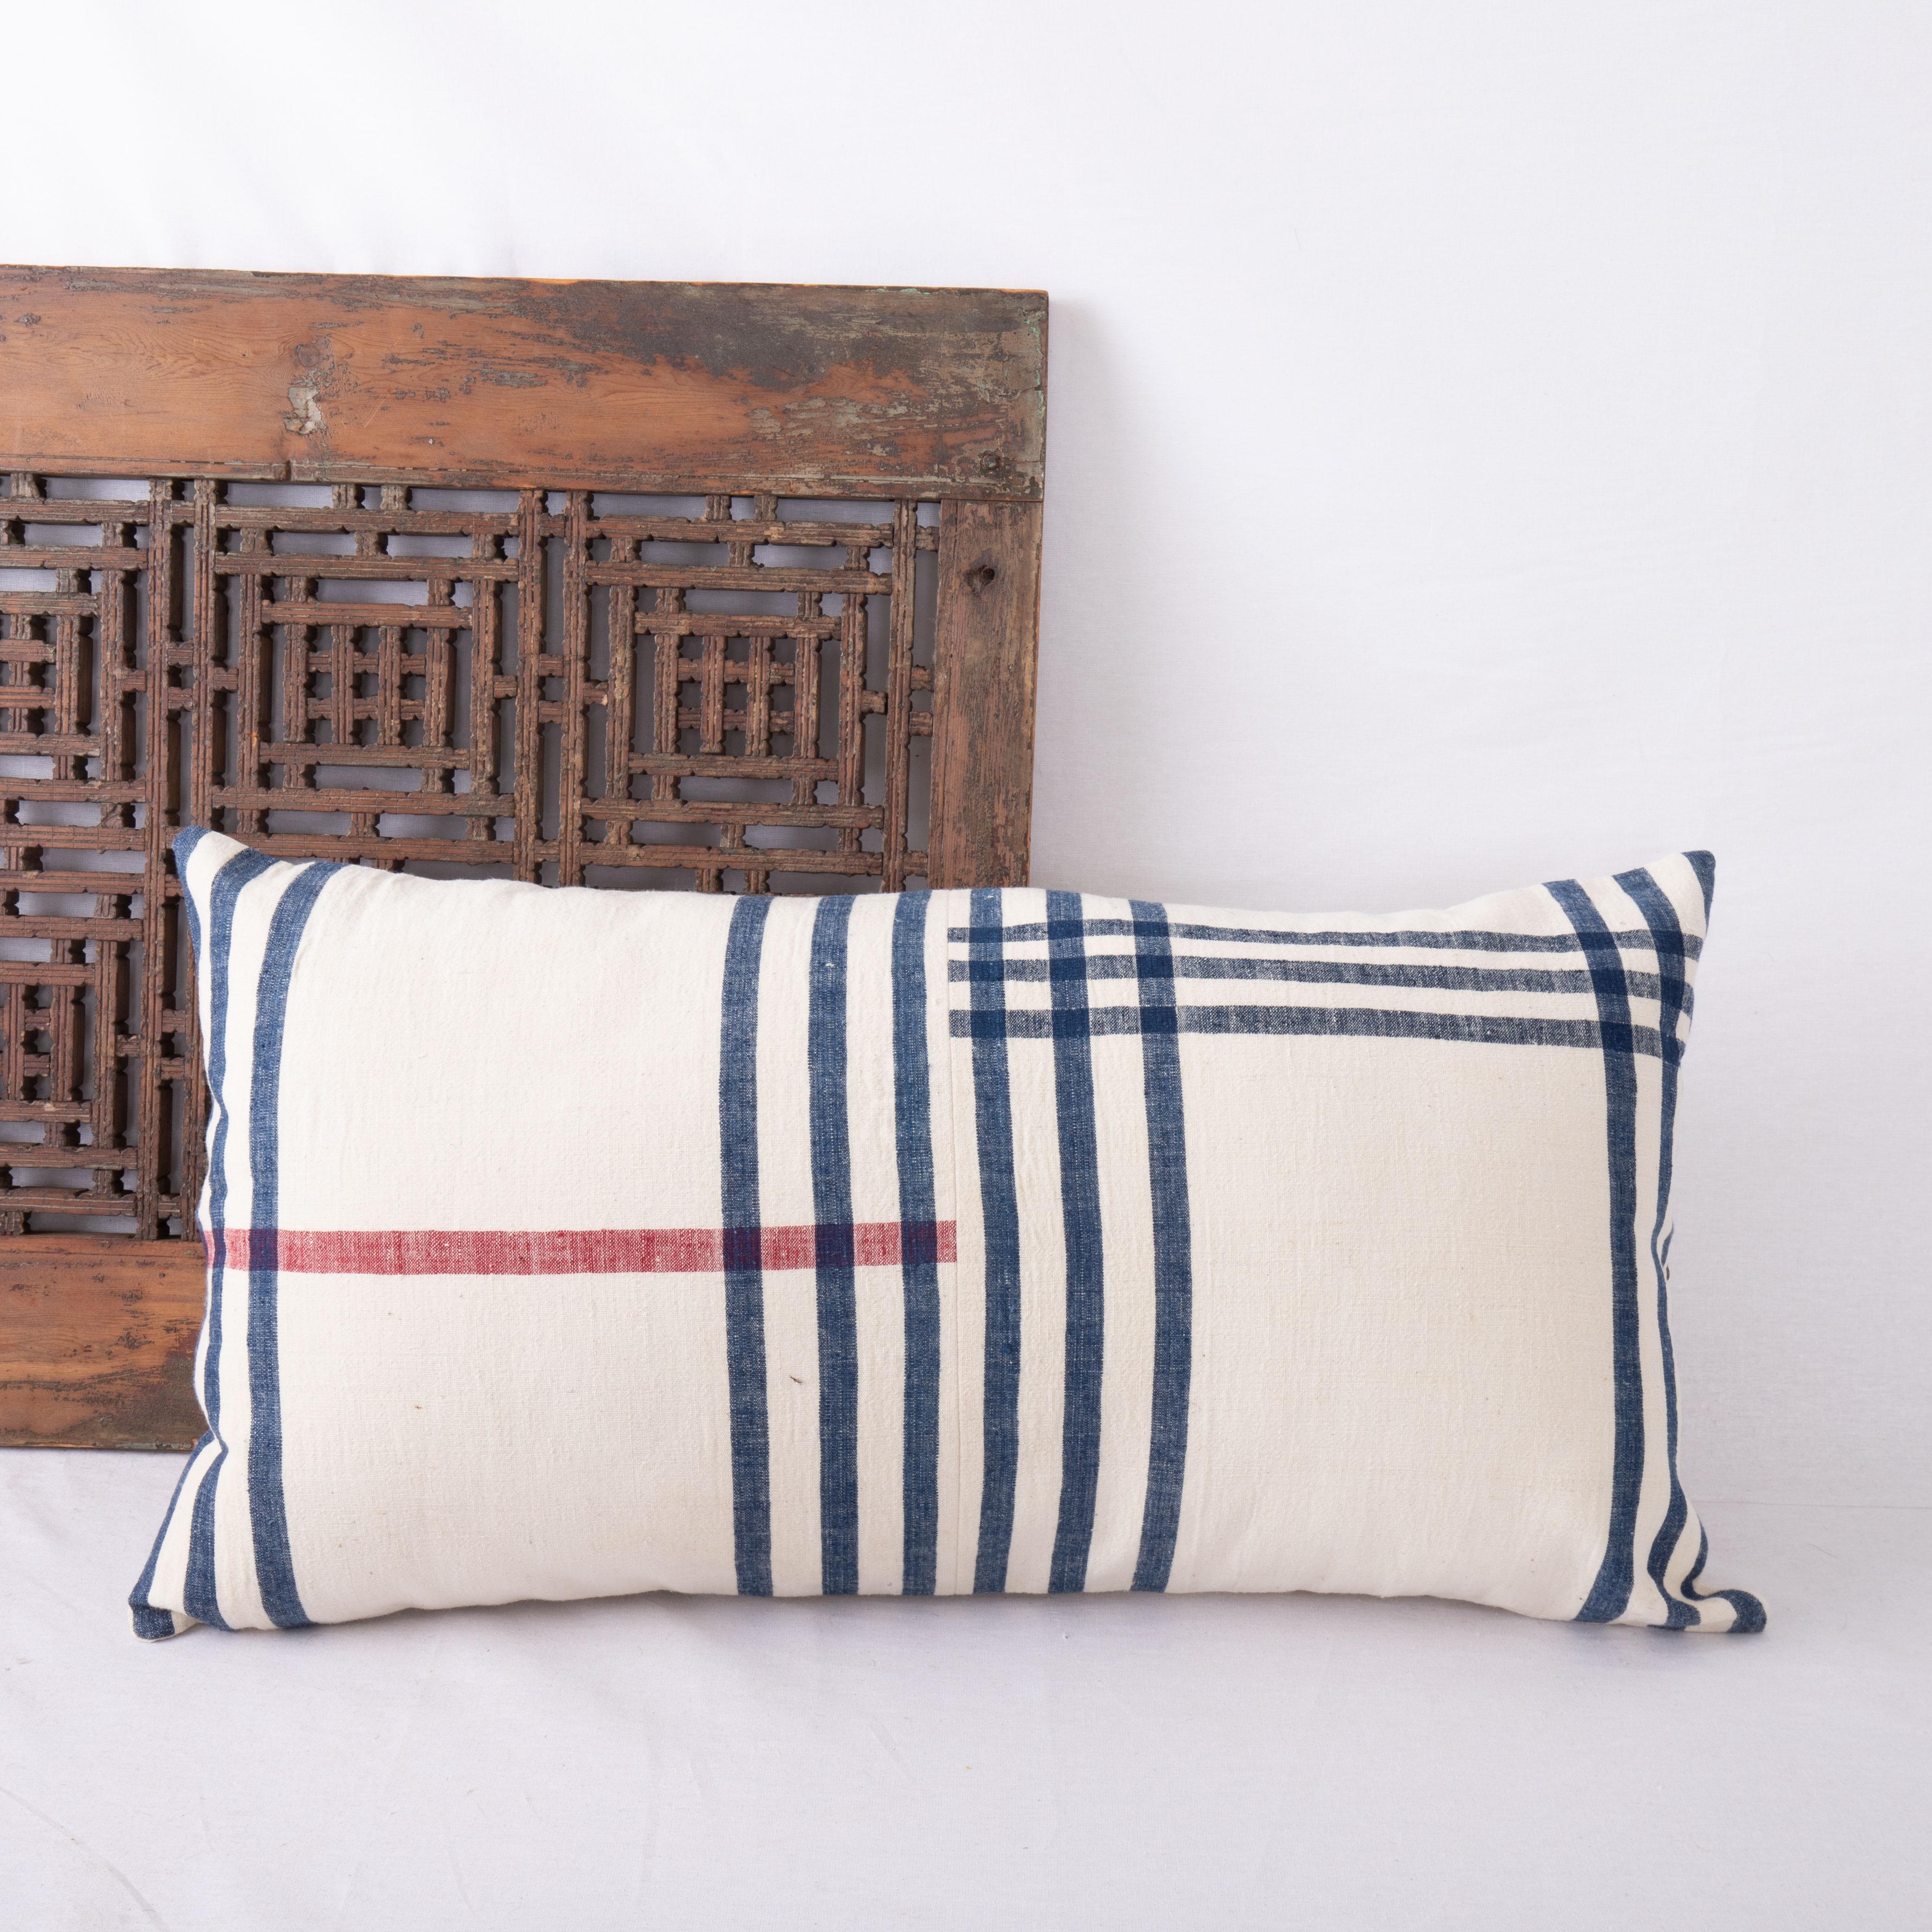 20th Century Lumbar Pillow Cover Made from a Vintage Anatolian Cotton Weaving, Mid 20th C. For Sale